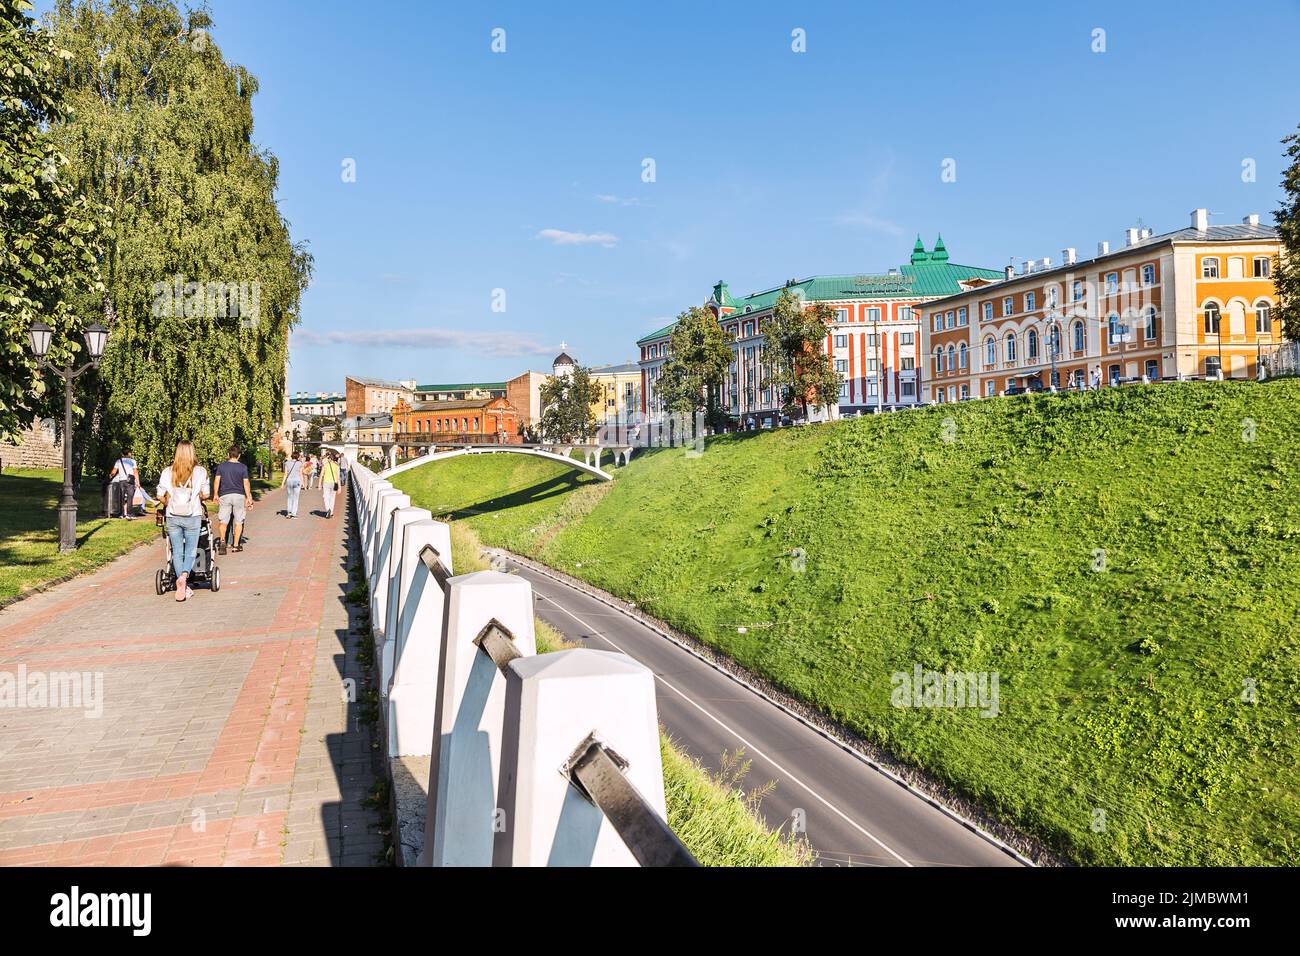 Pedestrian street with a white stone fence, with people walking. Stock Photo